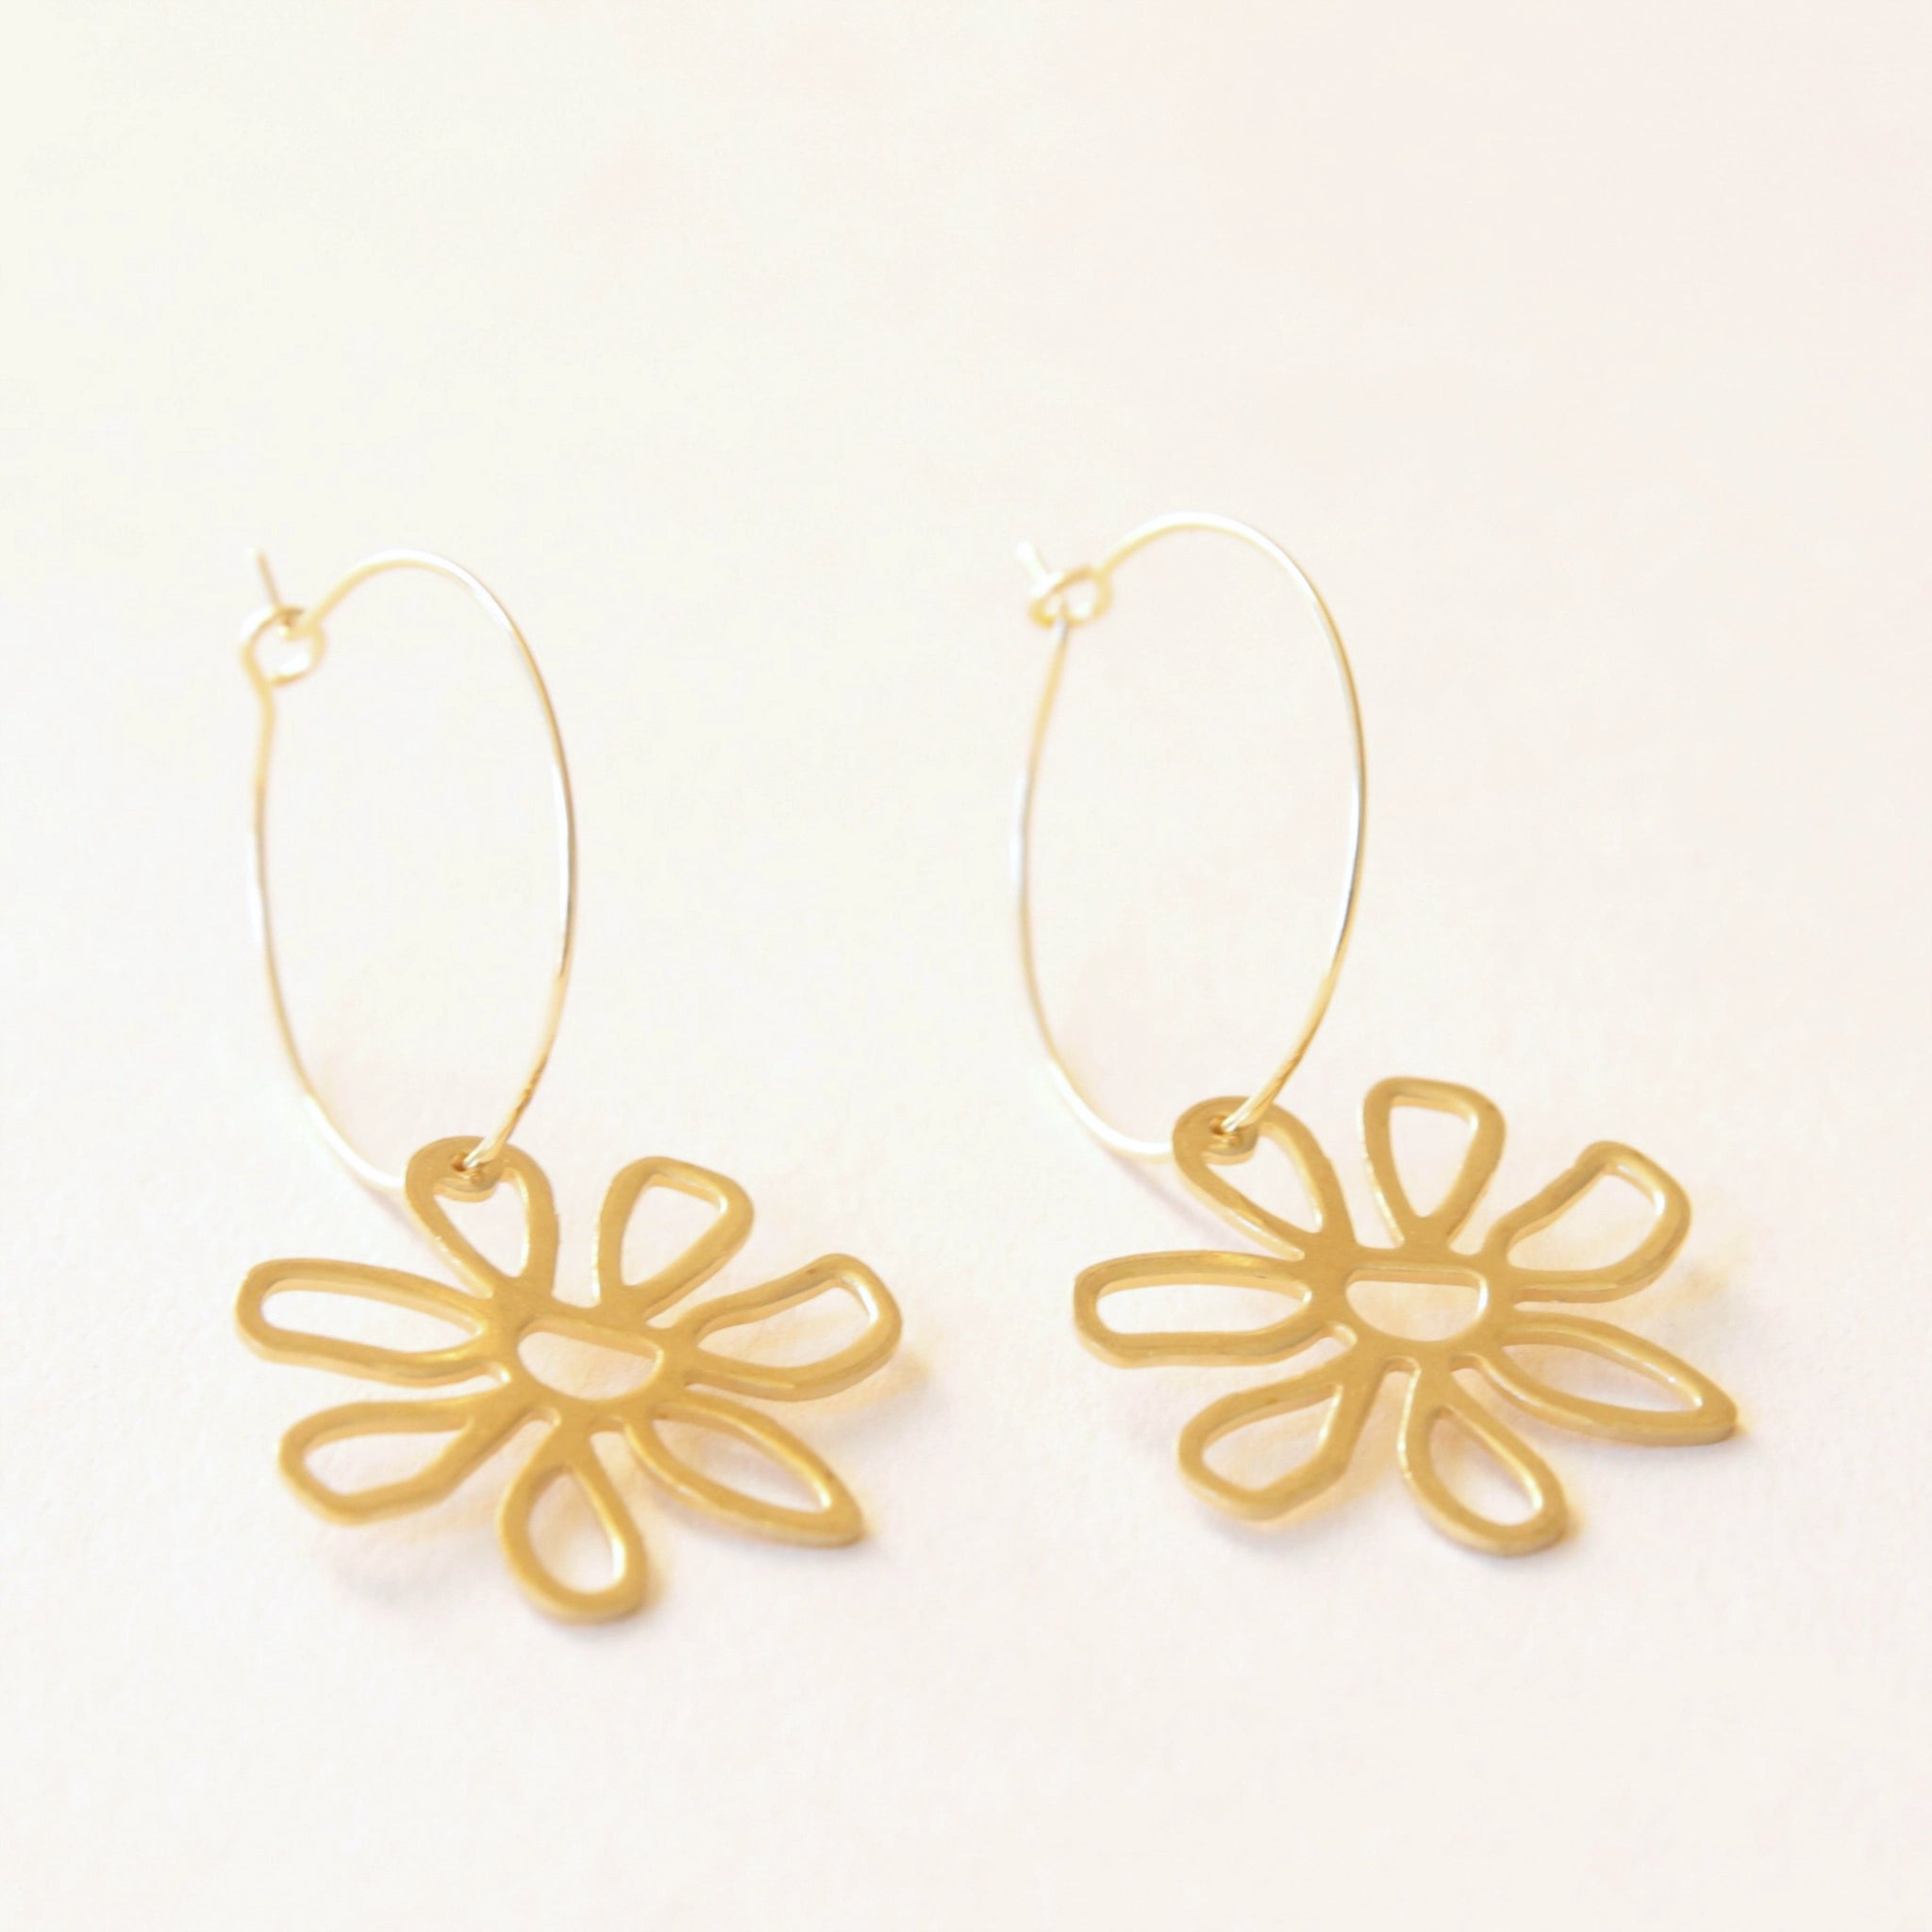 On a cream background is the smaller sized hoop gold earrings with the same flower charm hanging off the bottom of the hoop.  